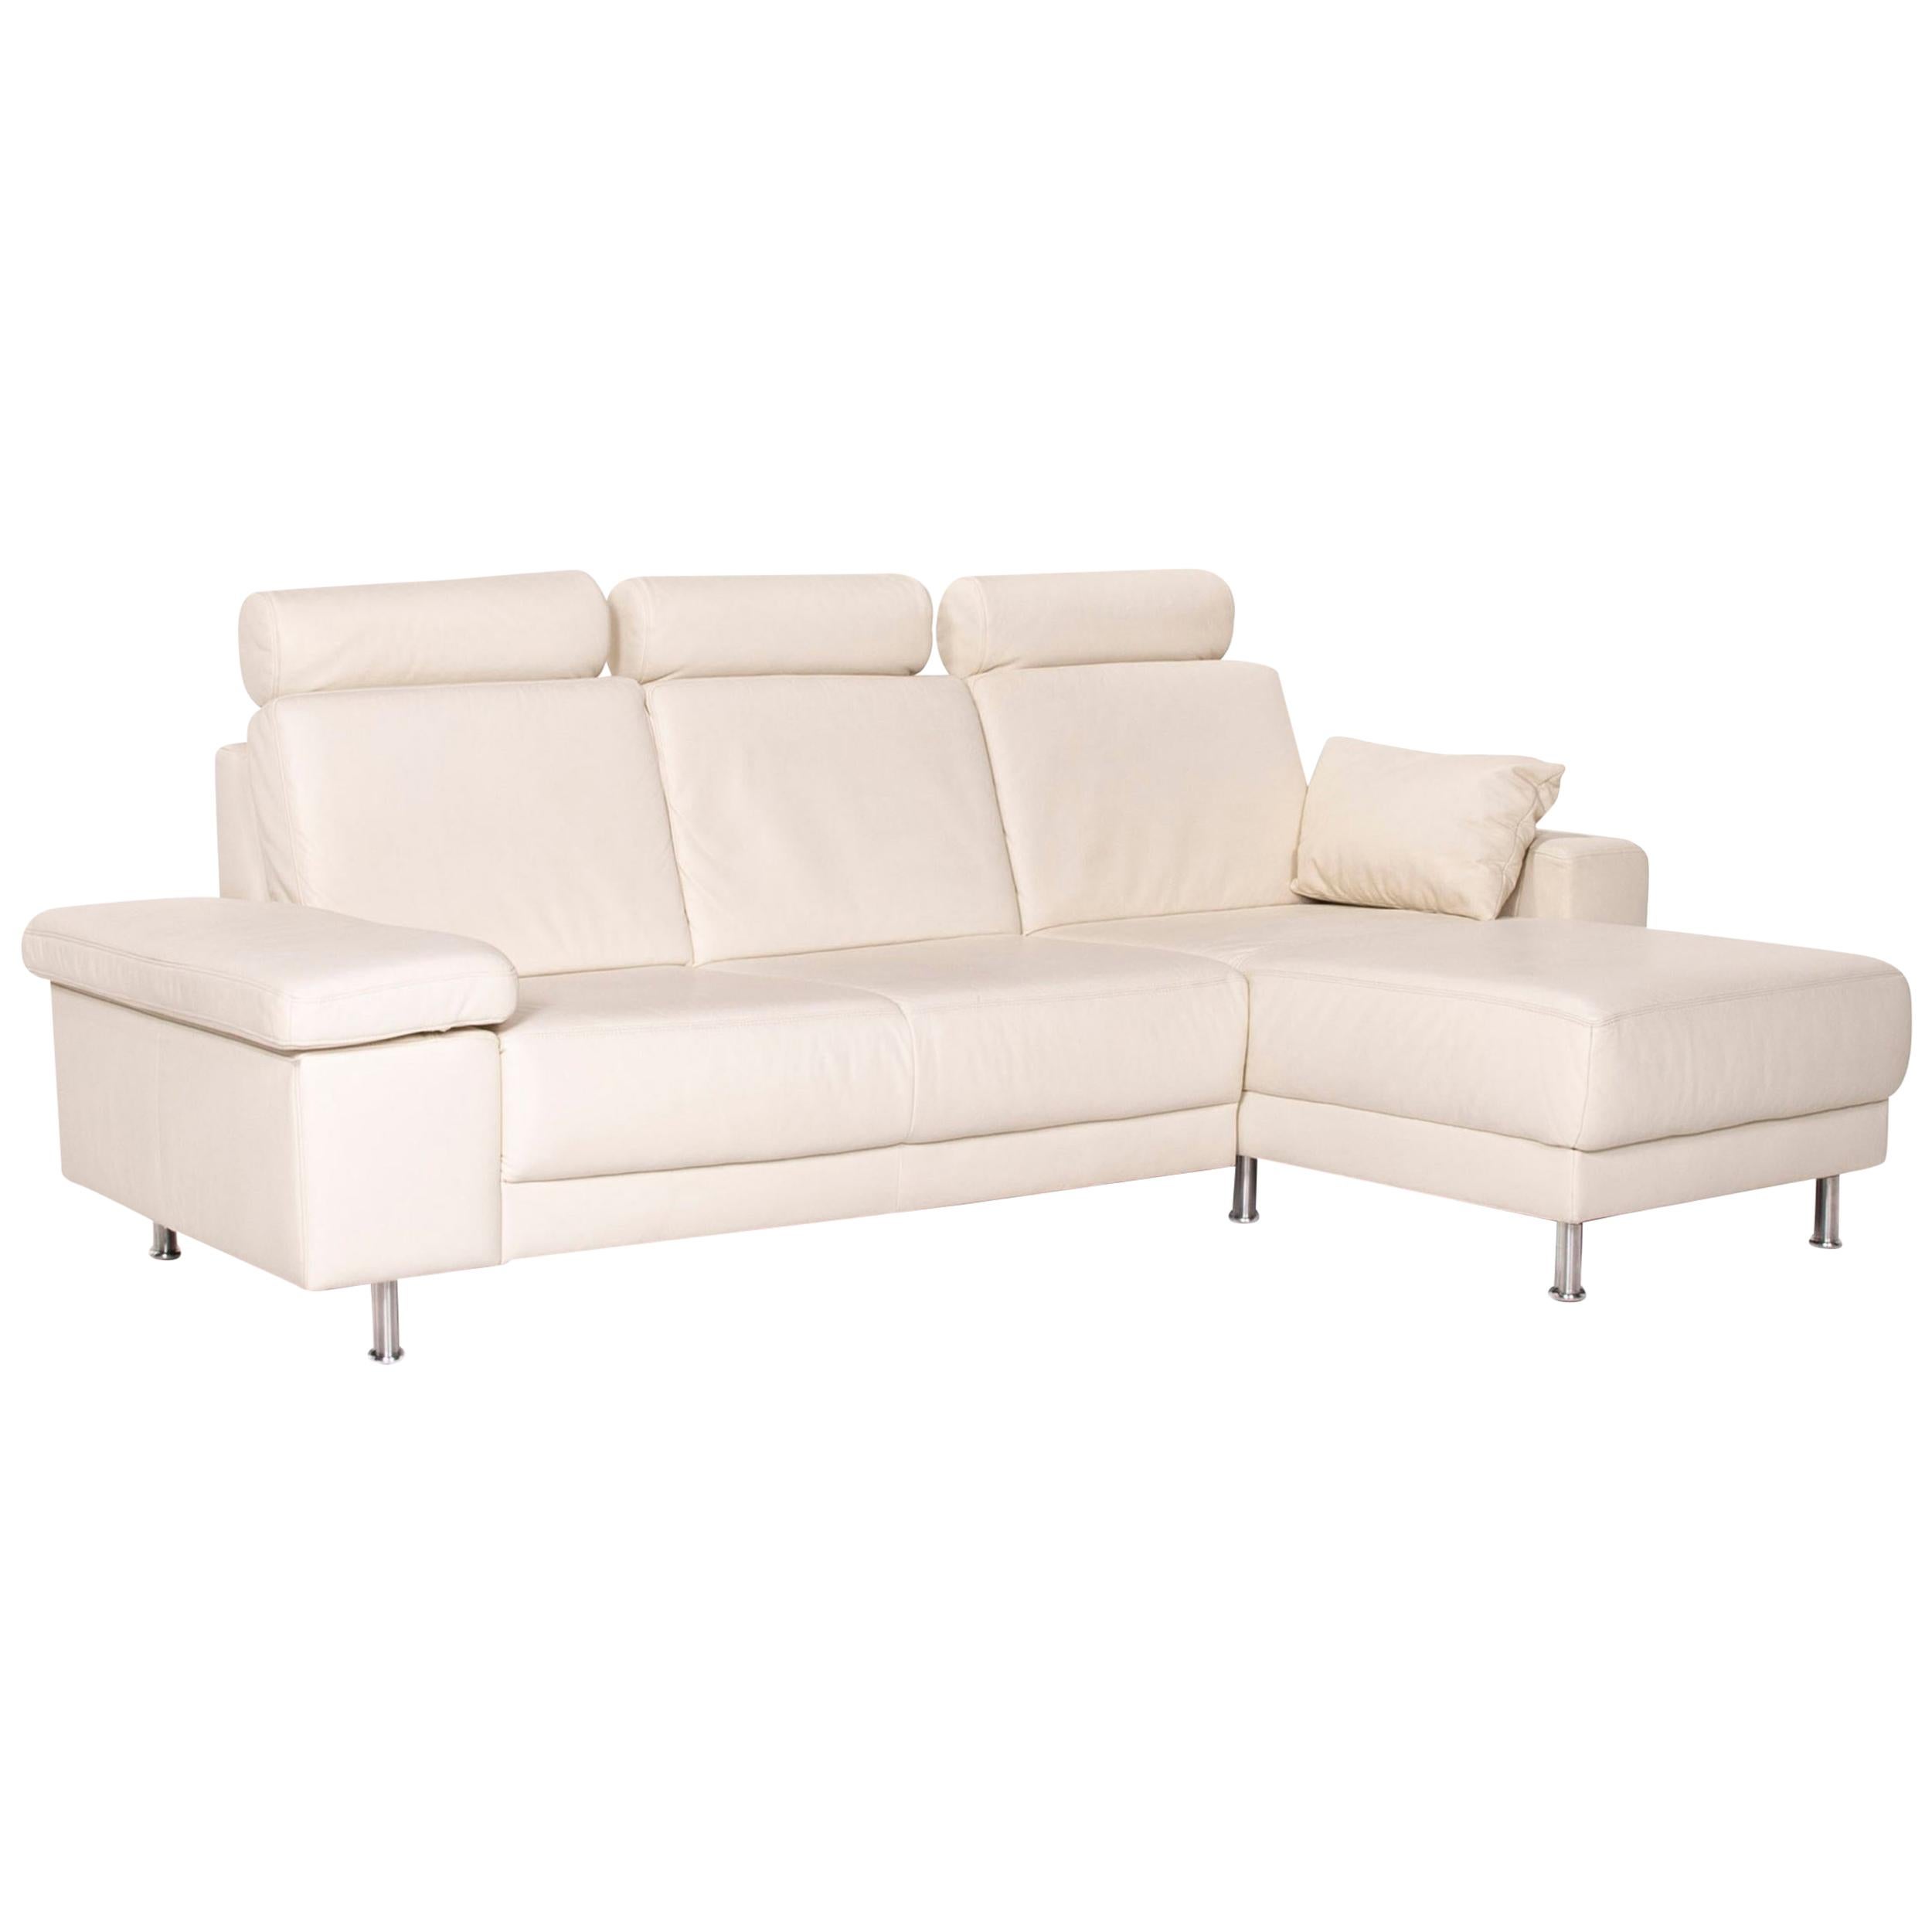 Musterring Leather Corner Sofa White Function Sofa Couch For Sale